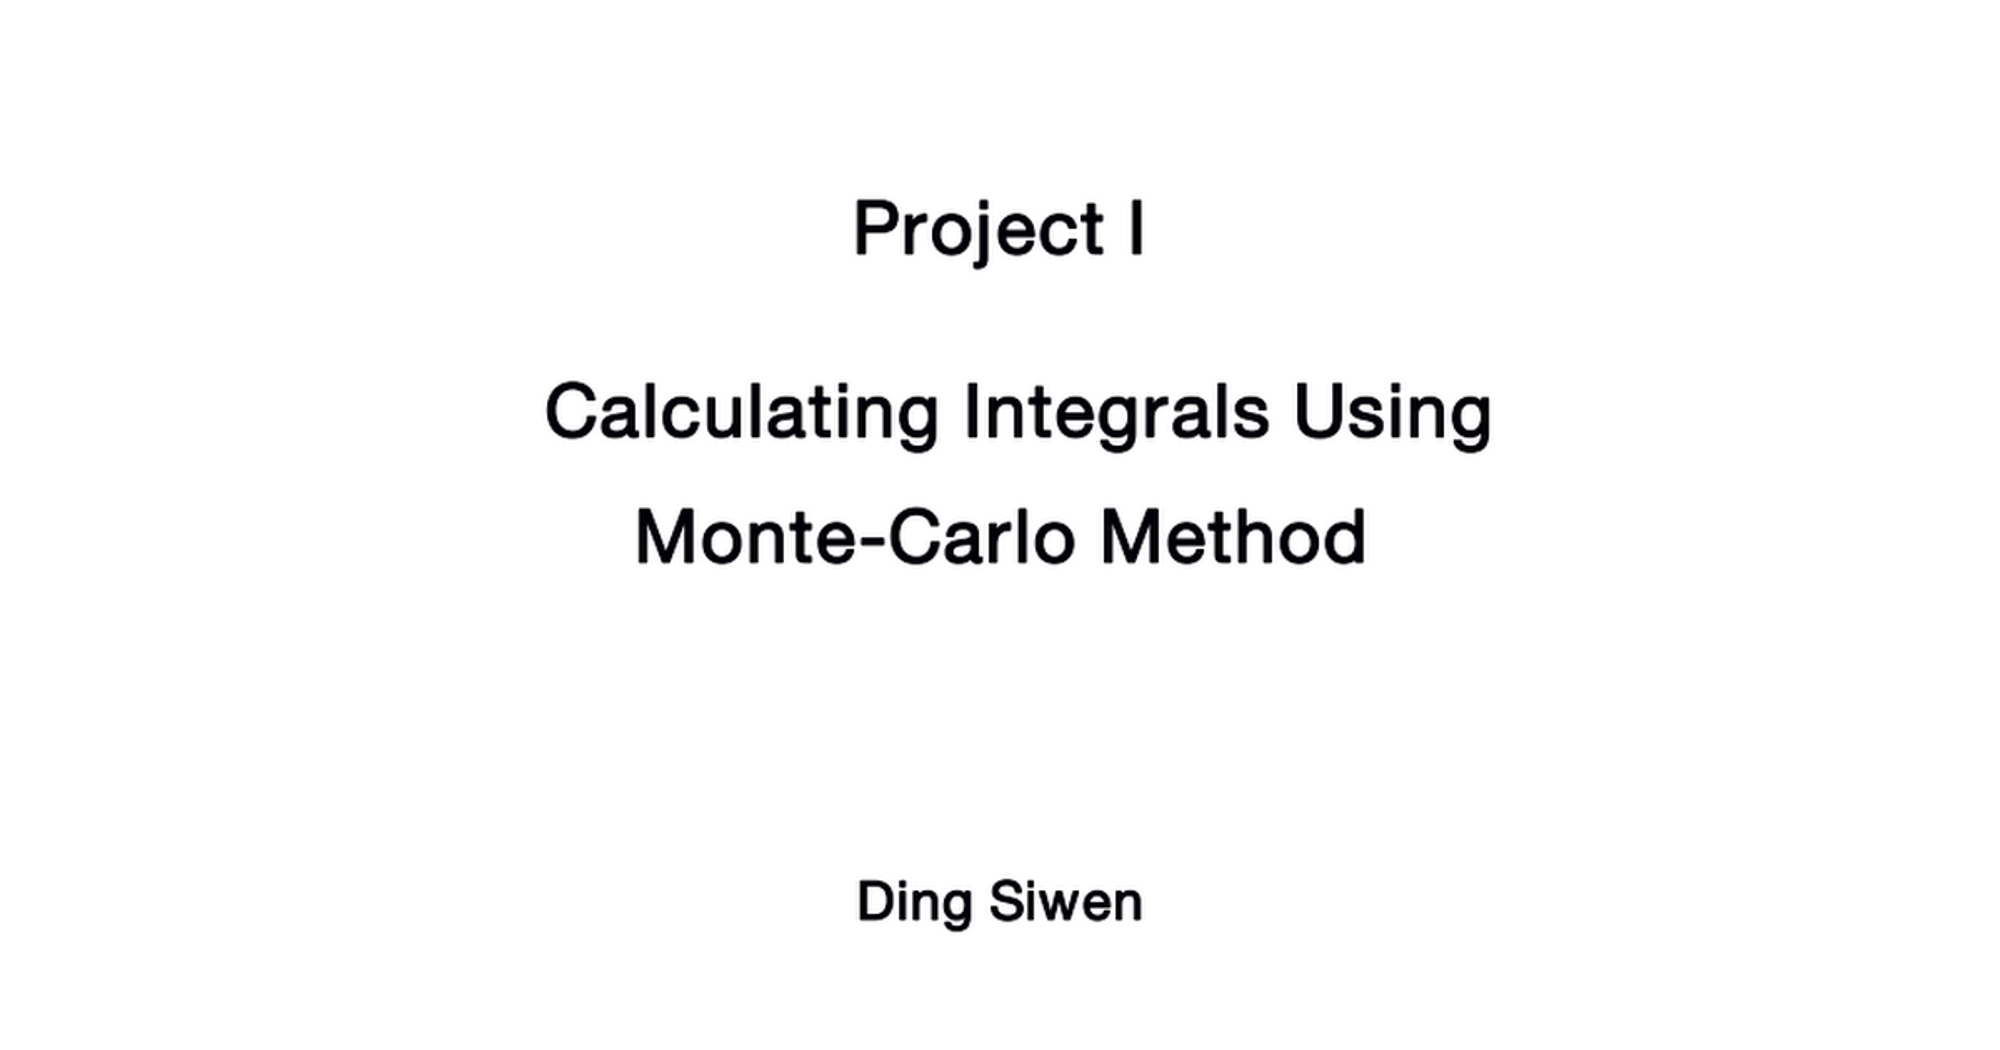 Project I-Calculating Integrals Using Monte-Carlo Method in Python.pdf